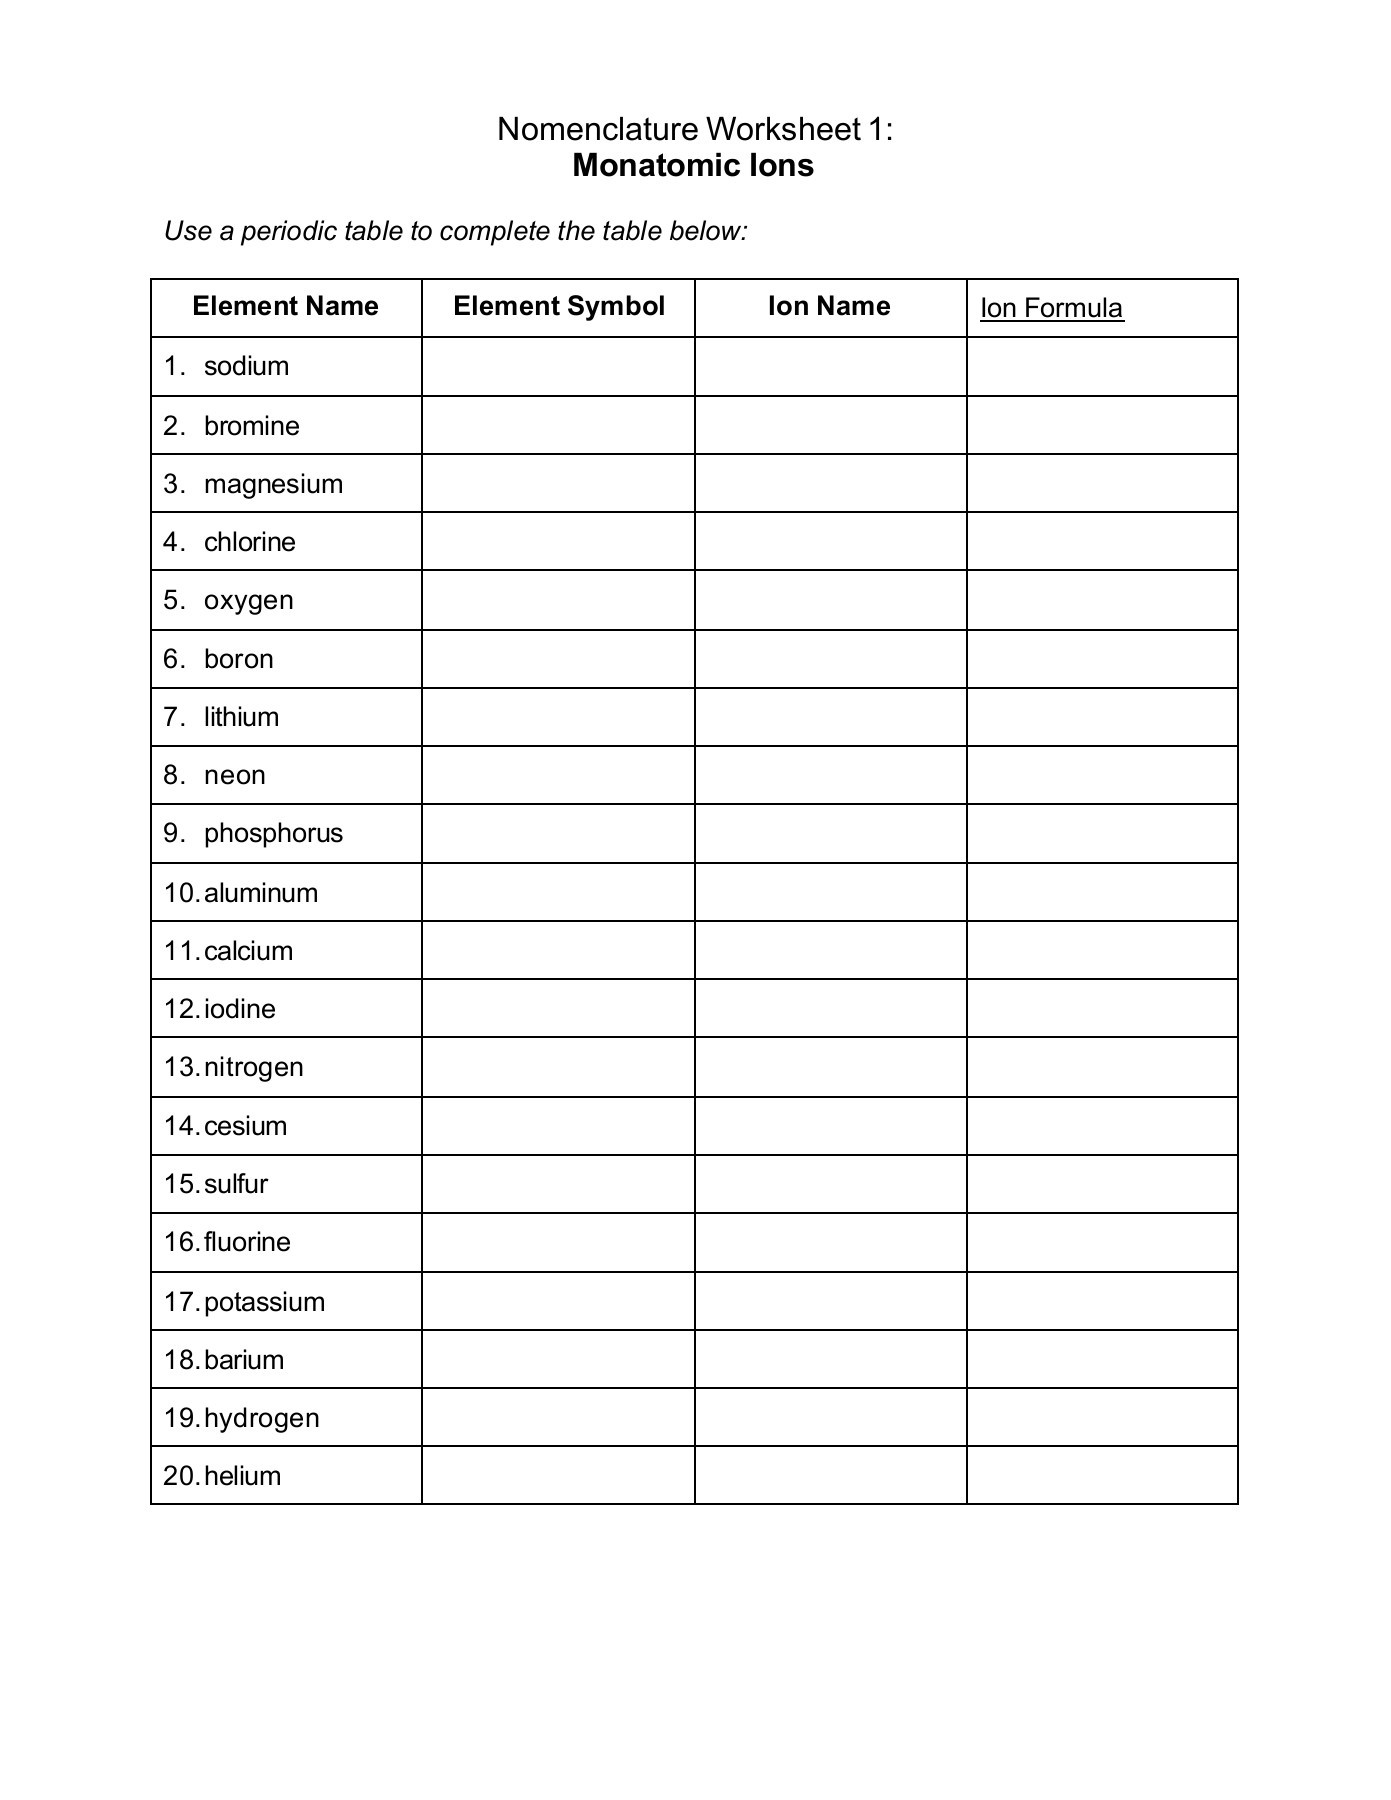 Atoms Vs Ions Worksheet Answers Monatomic Ions Academic Puter Center Pages 1 12